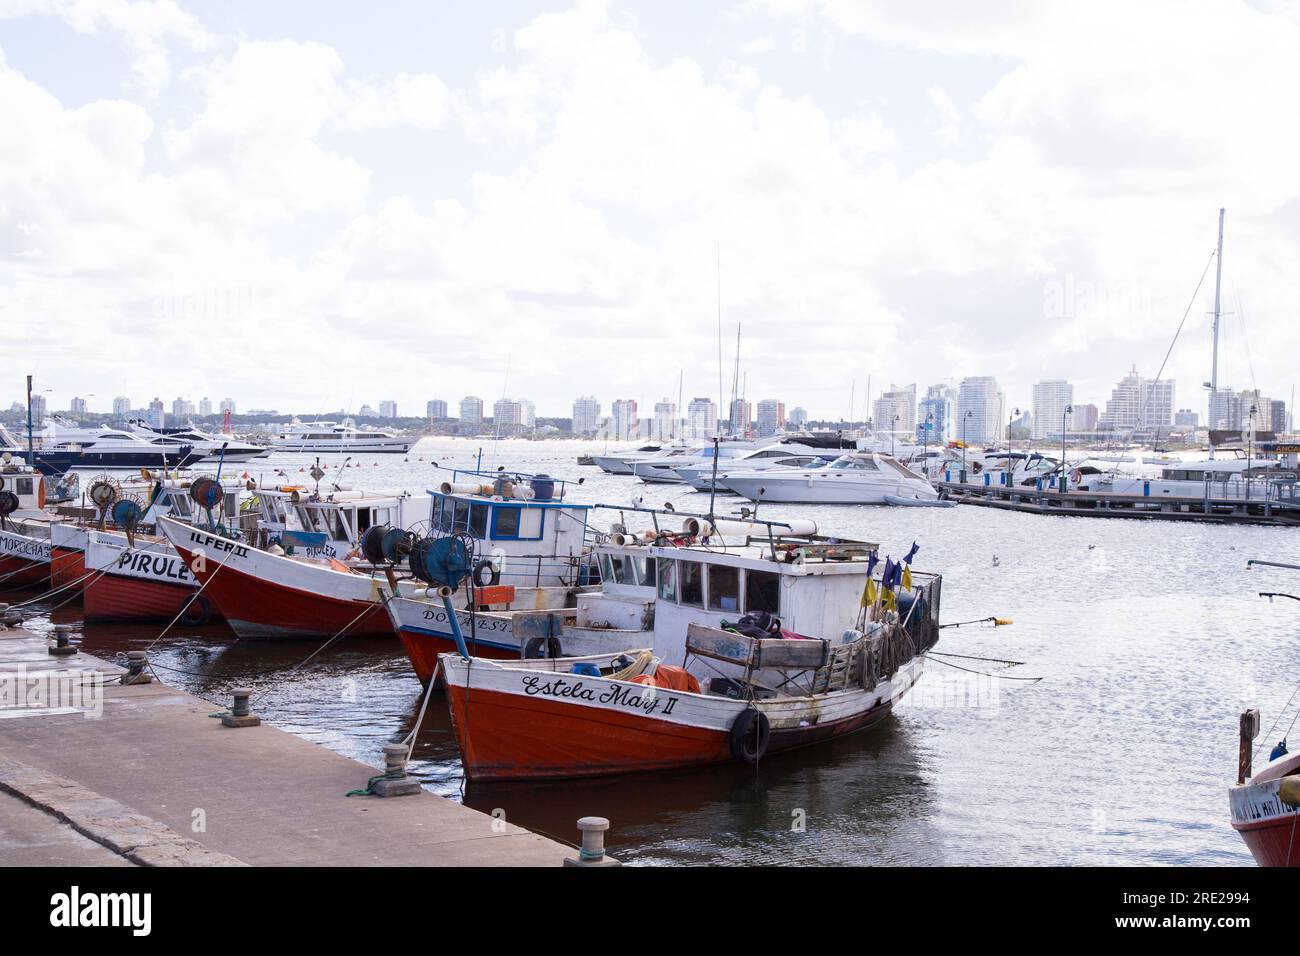 Serene fishing boats docked at the pier in Punta del Este, Uruguay, capturing the tranquility of the coastal town Stock Photo